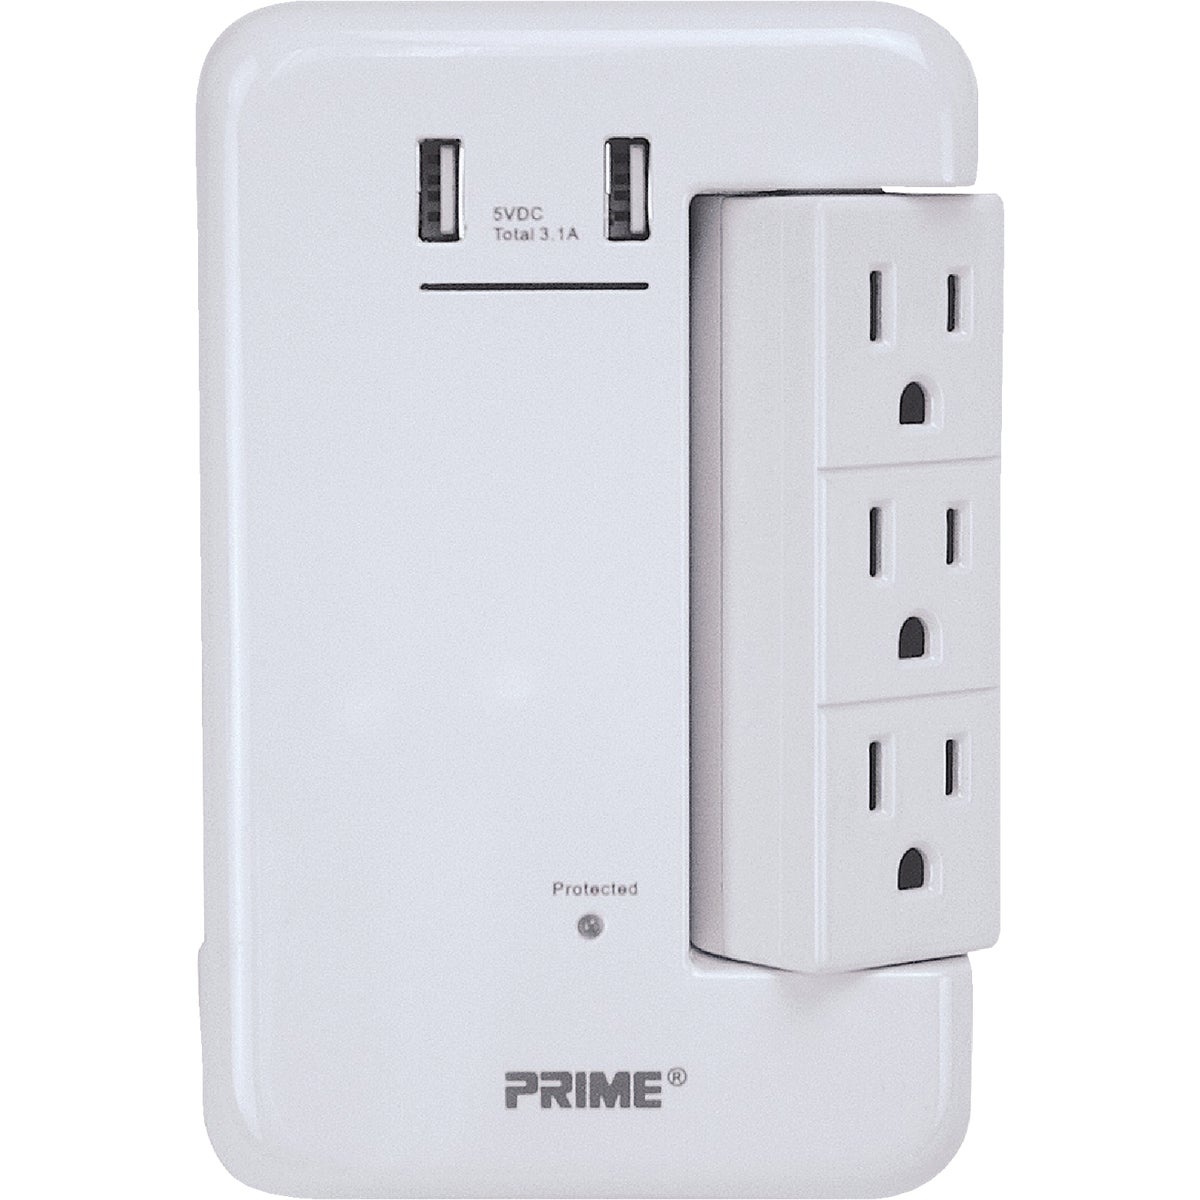 Item 501925, Plug-in outlet and USB (universal serial bus) port charger.